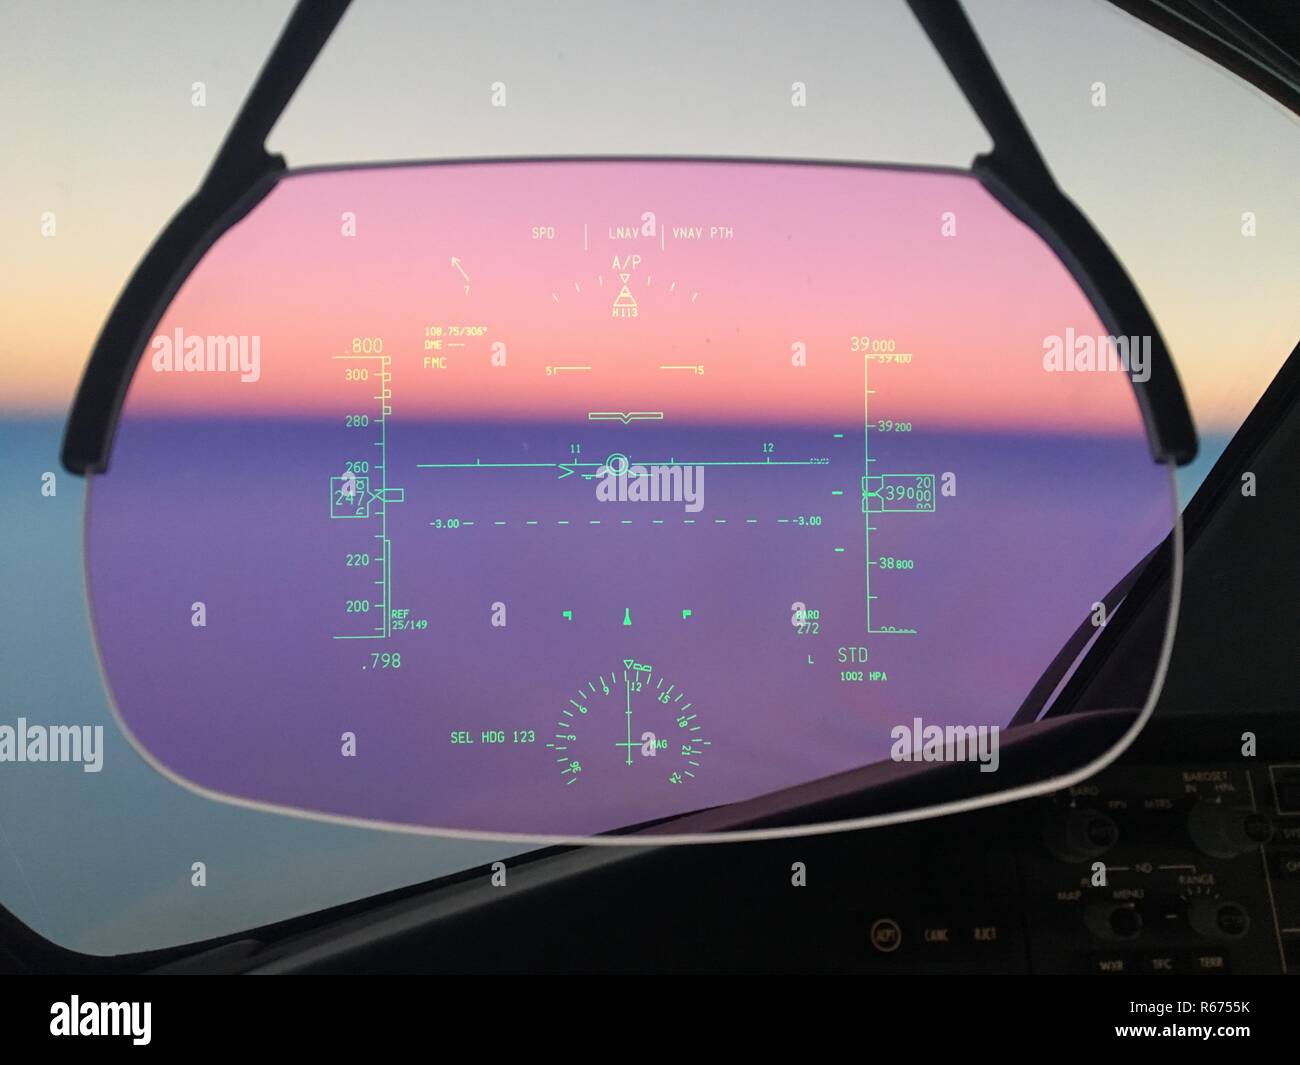 Modern aircraft heads up display. Close up of HUD on commercial jet airliner in flight showing display of aircraft information Stock Photo